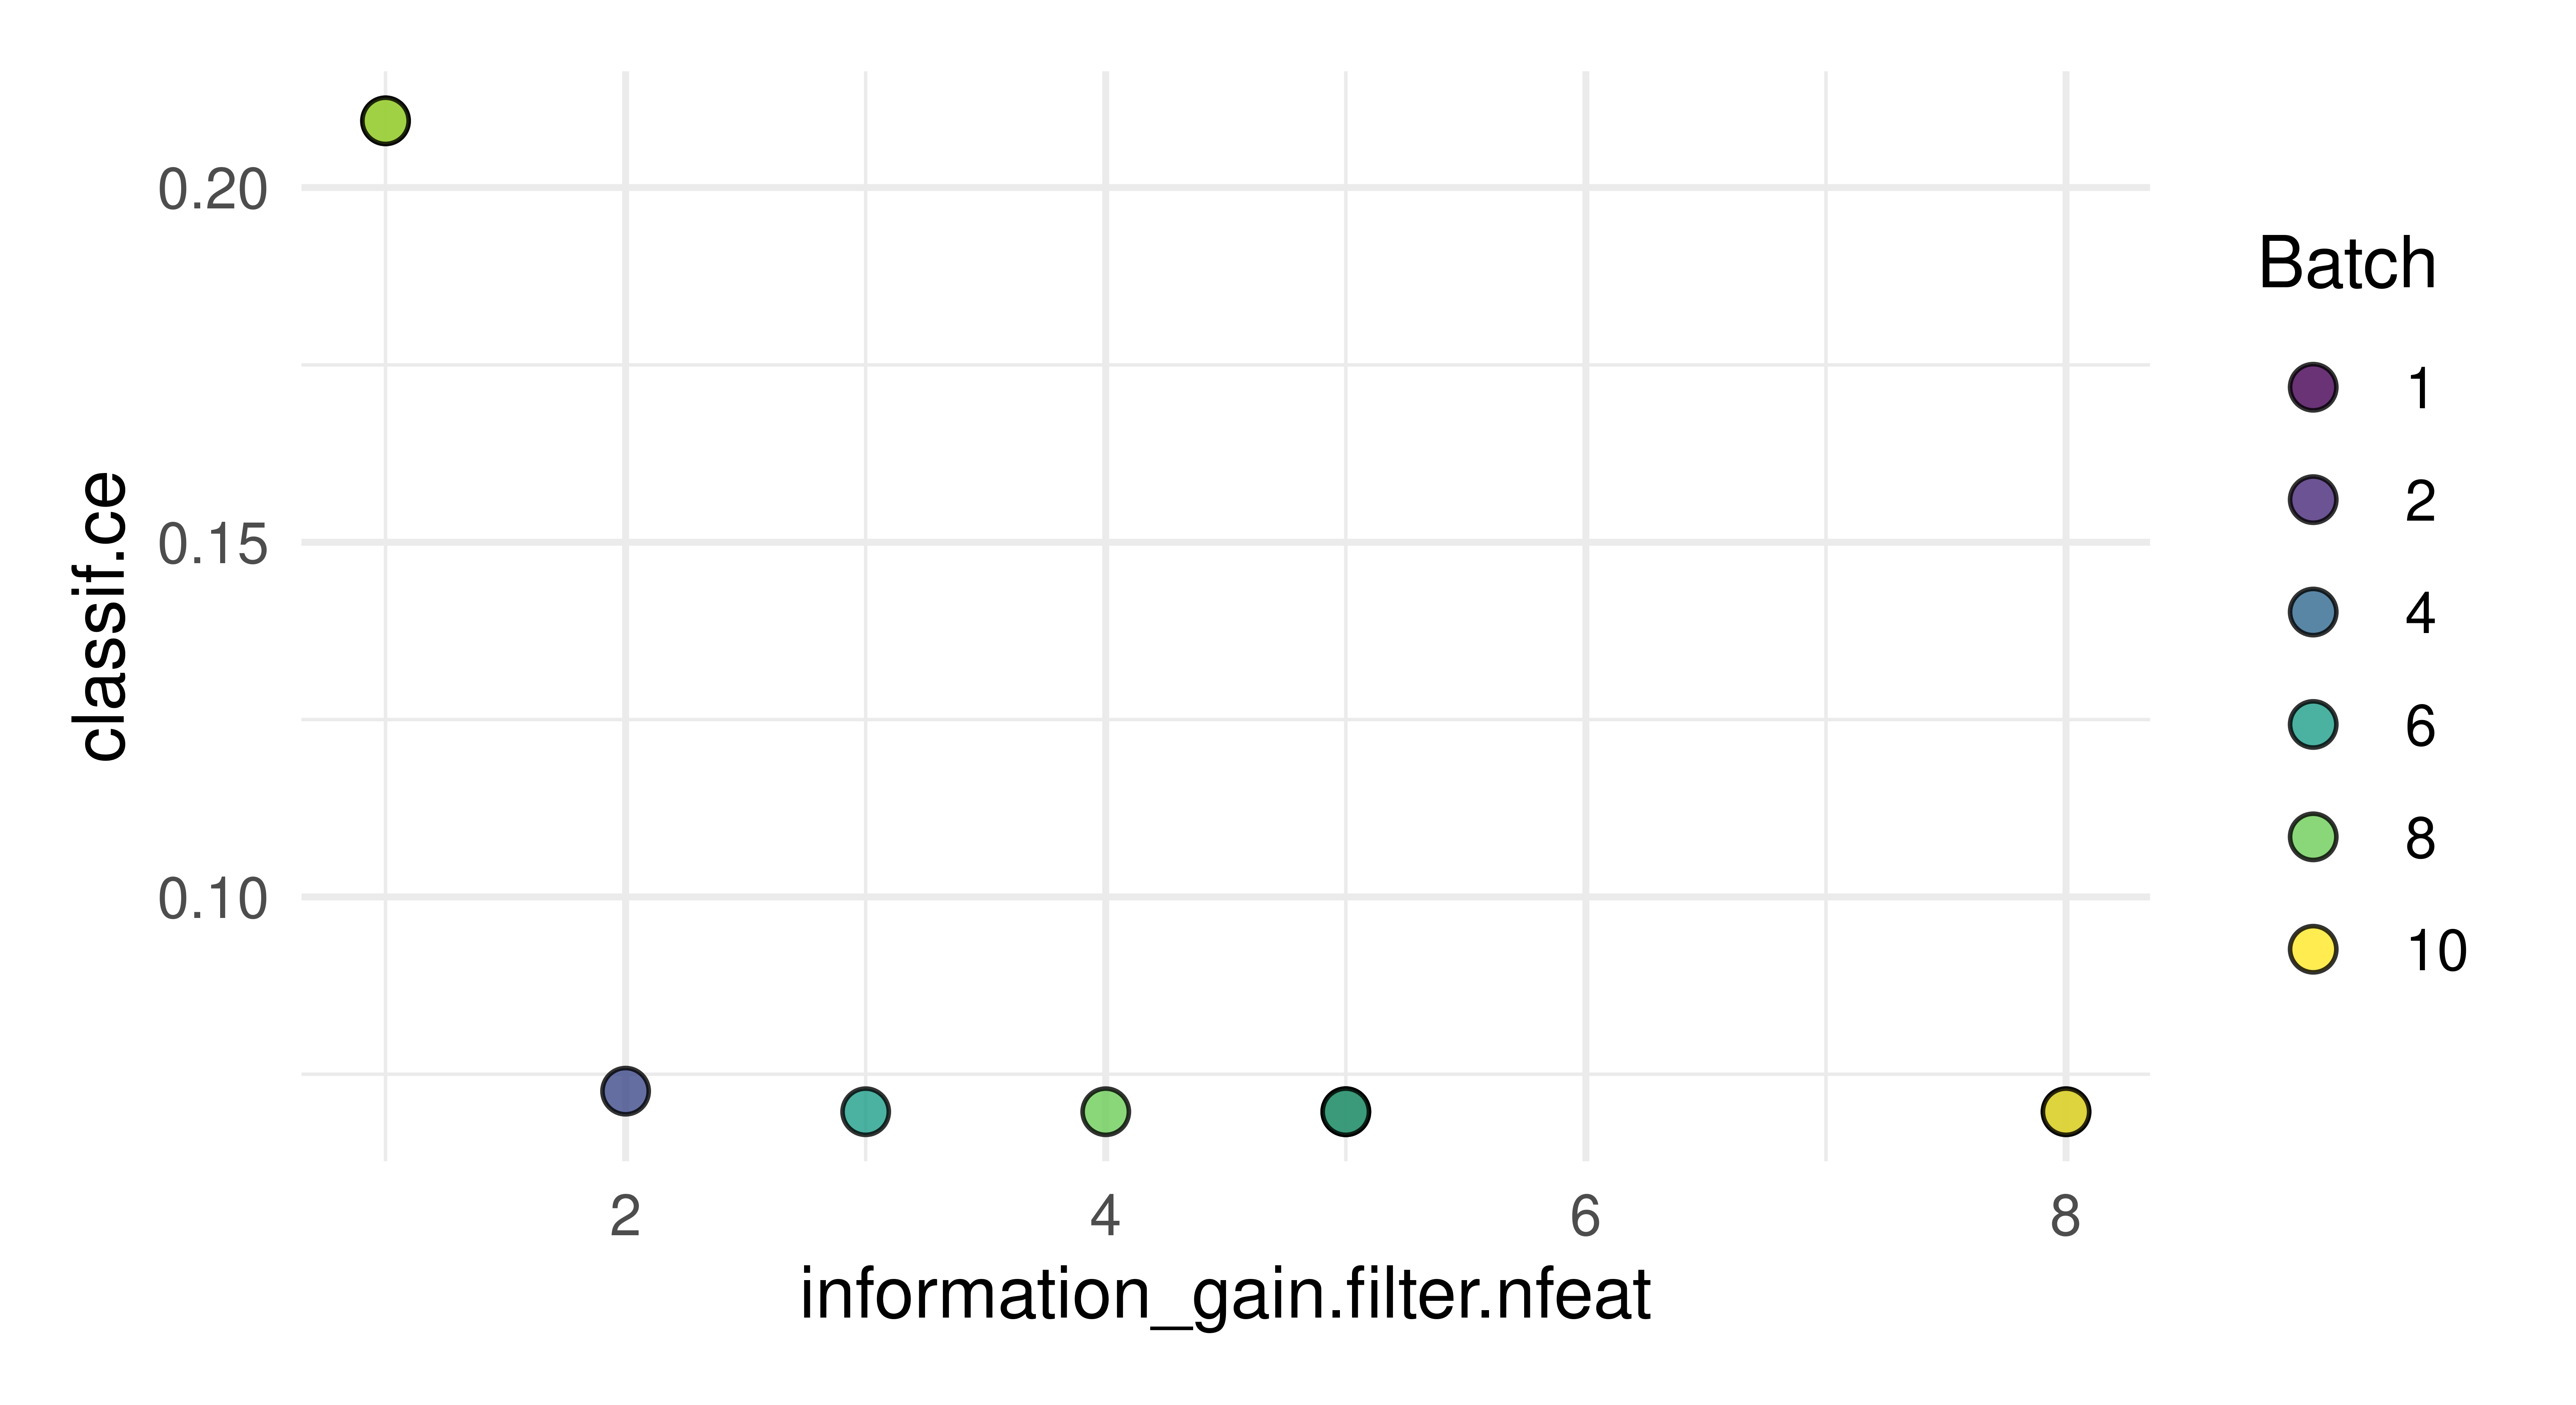 Plot showing model performance in filter-based feature selection, showing that adding a second, third, and fourth feature to the model improves performance, while adding more features achieves no further performance gain.